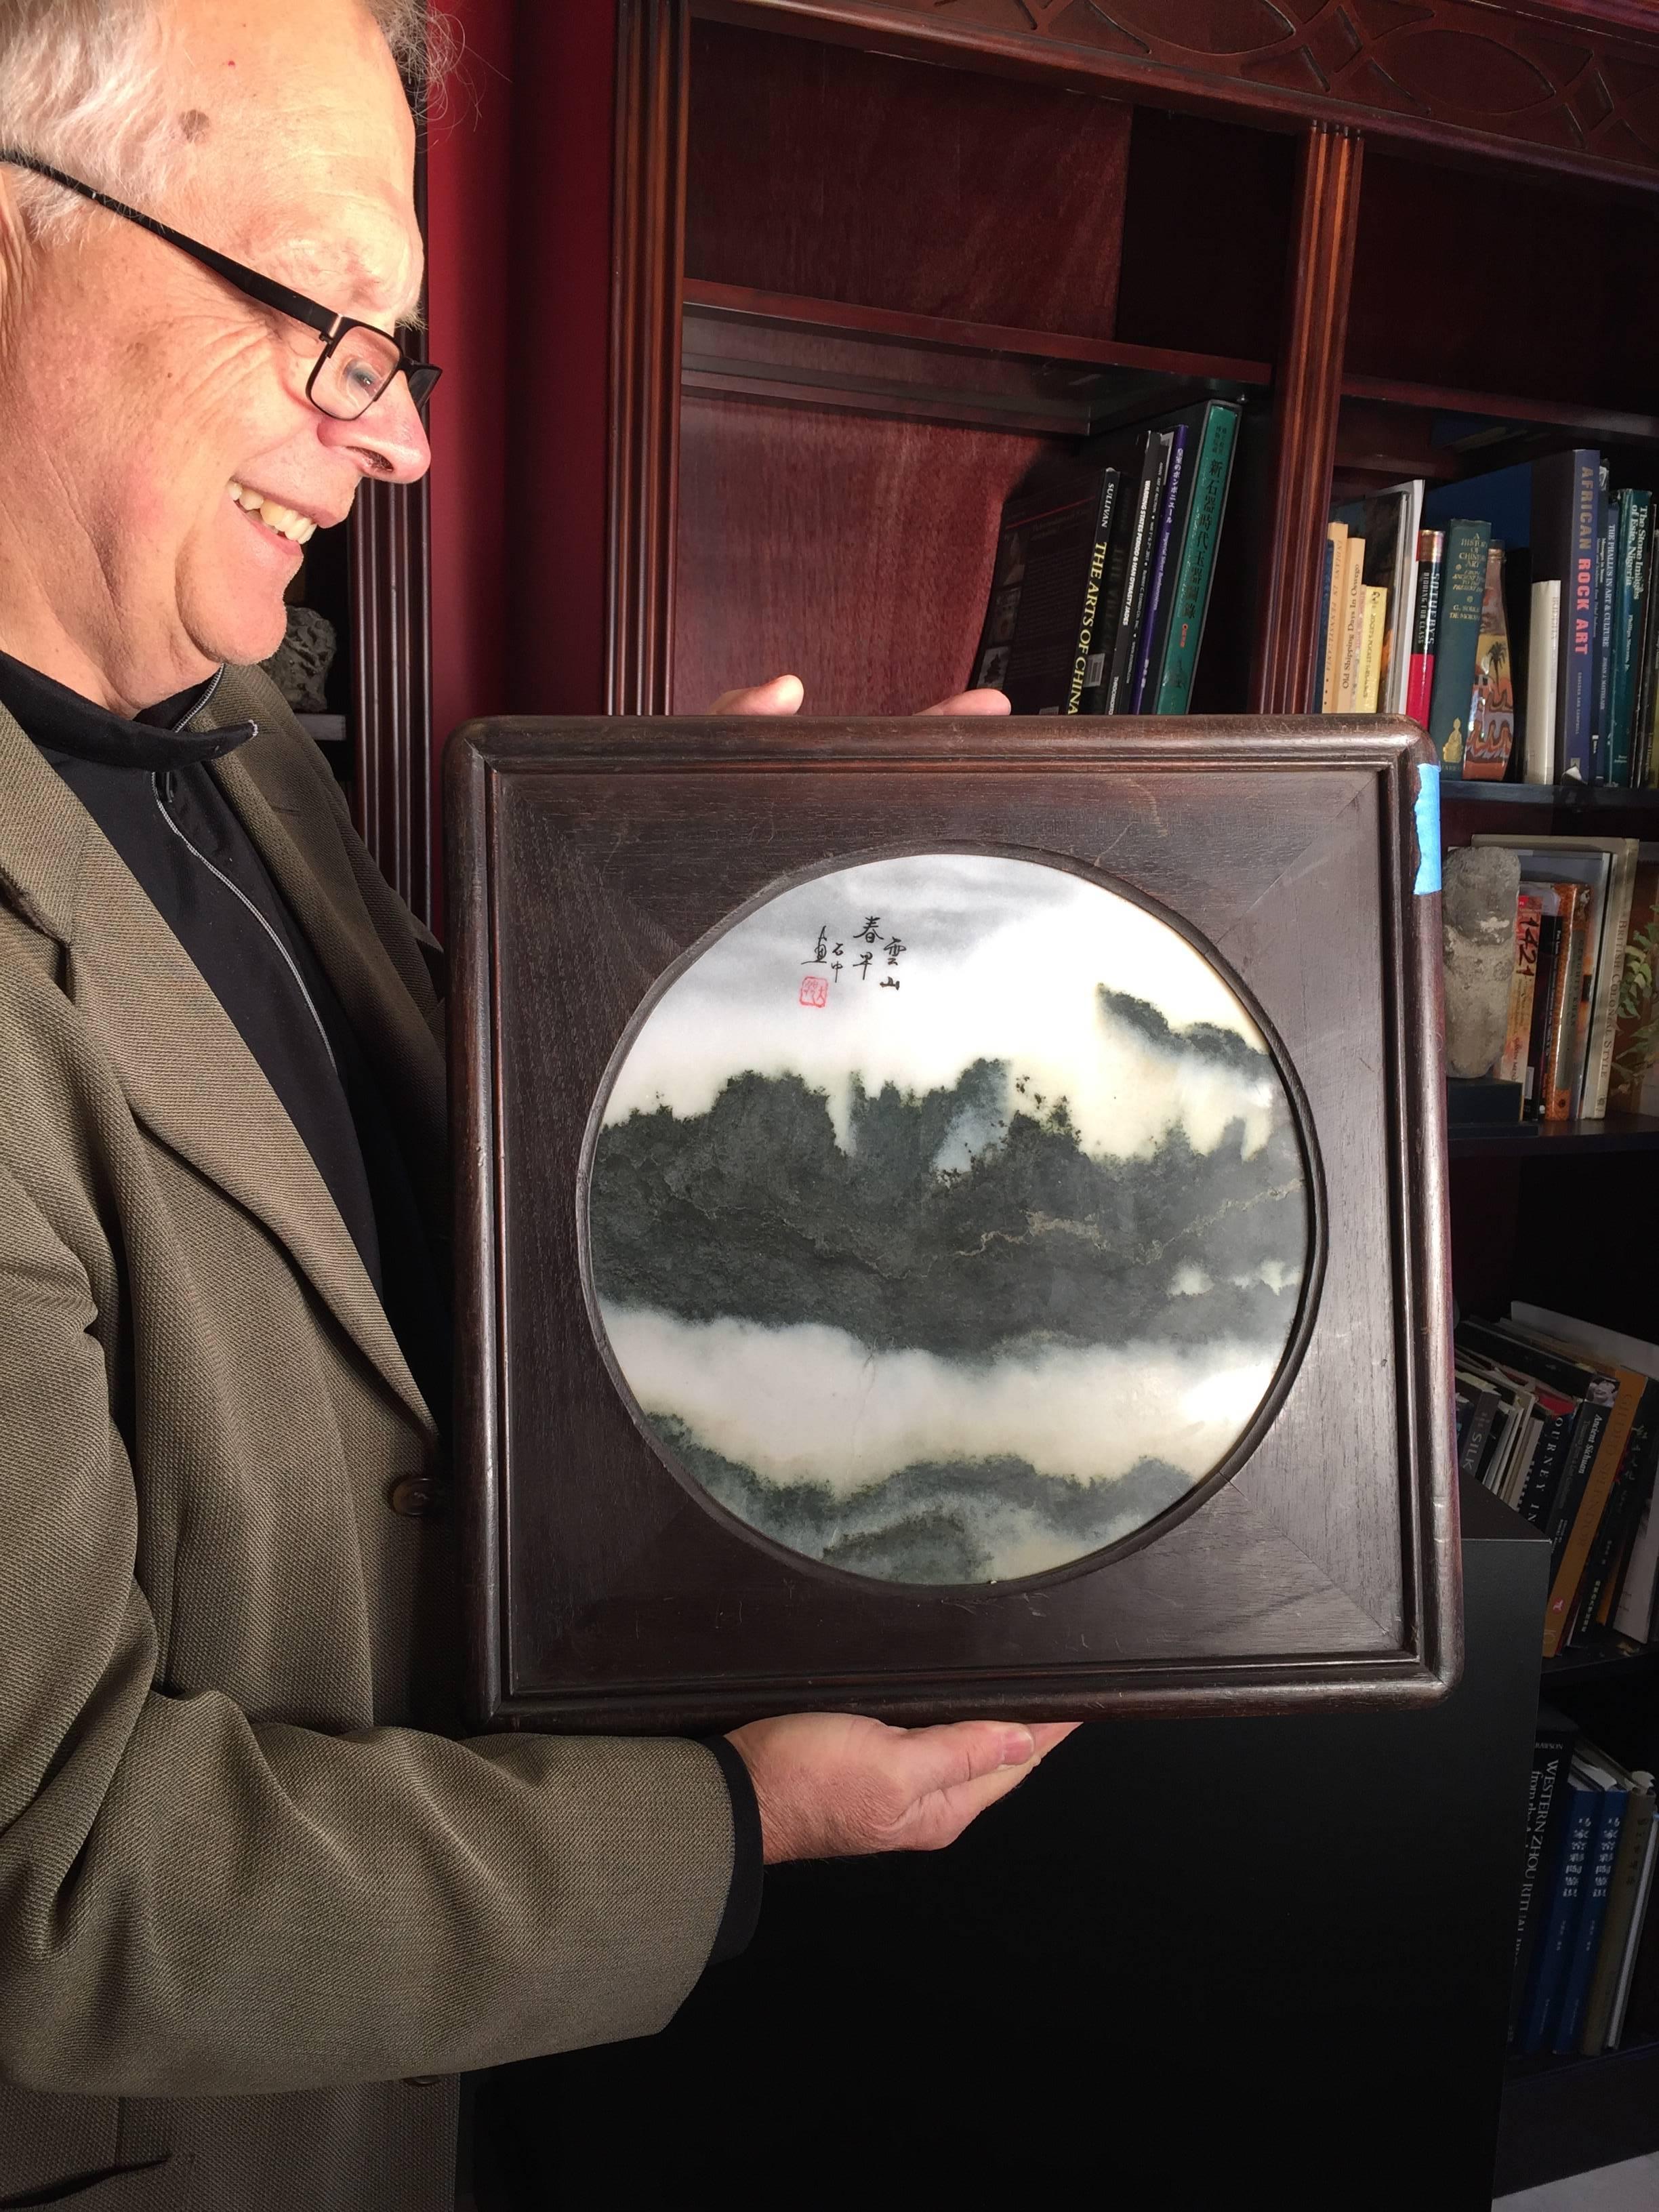 This Chinese extraordinary round natural stone painting of a mountain range in clouds is called a dream stone, Shih-hua;. They are cut from historic Dali marble found in the Cangshan mountains of western China. These mysterious mountains, unique in